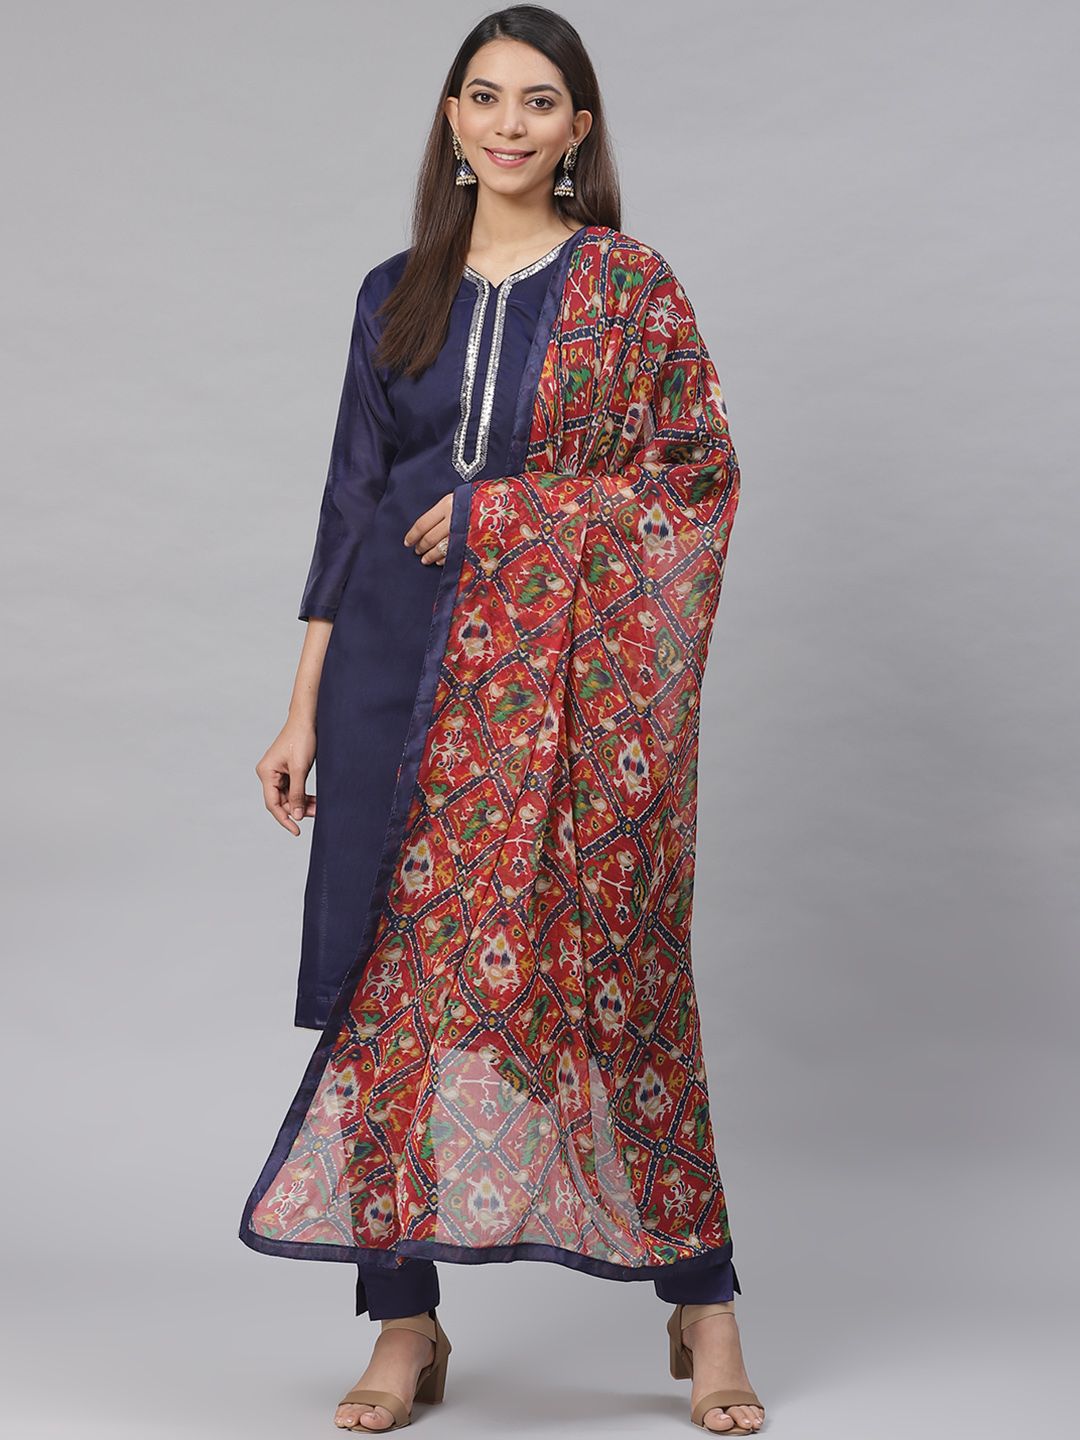 Saree mall Navy Blue & Red Unstitched Dress Material Price in India